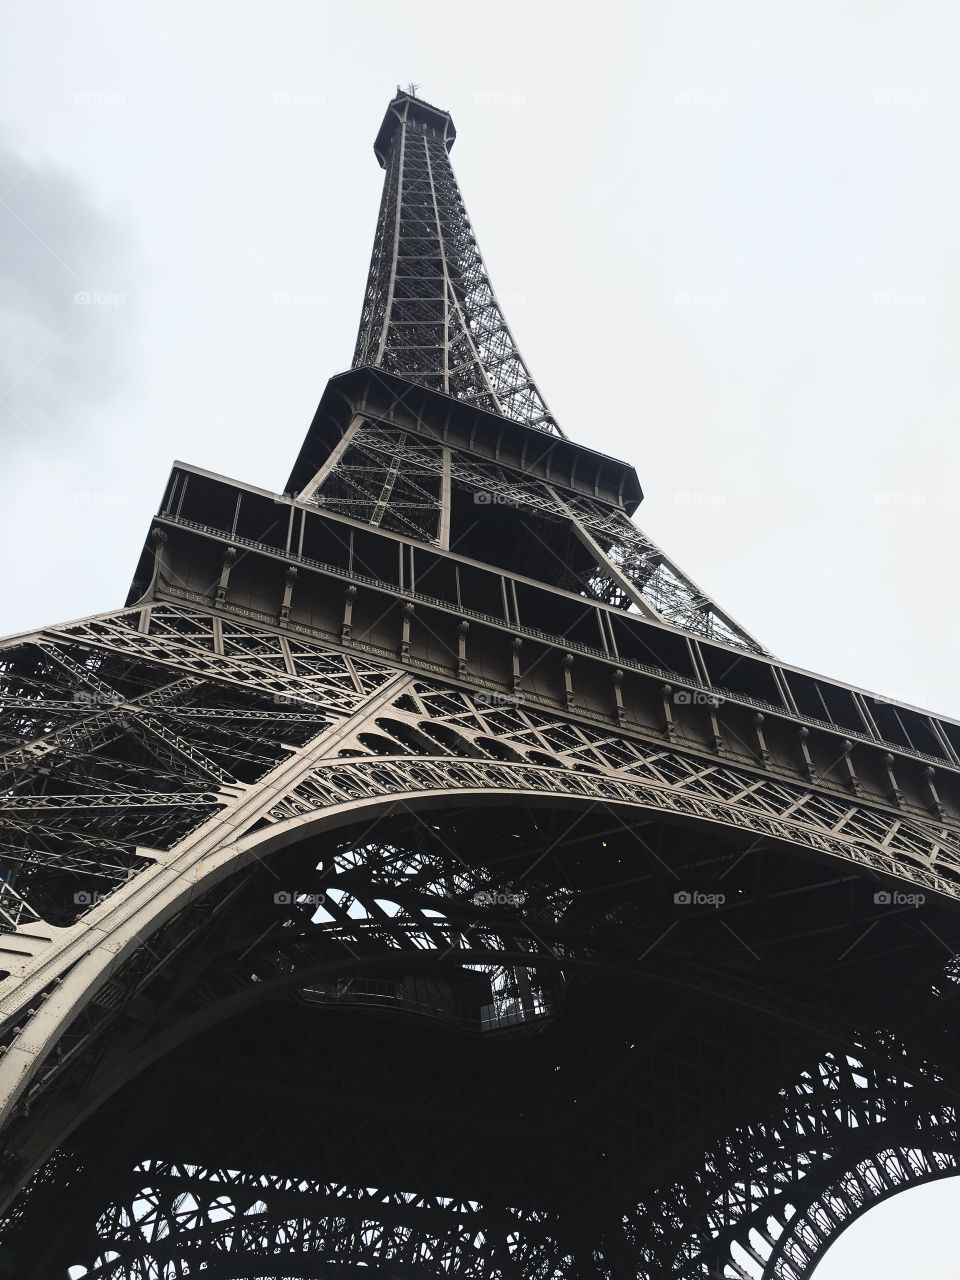 The Eiffel Tower from below 